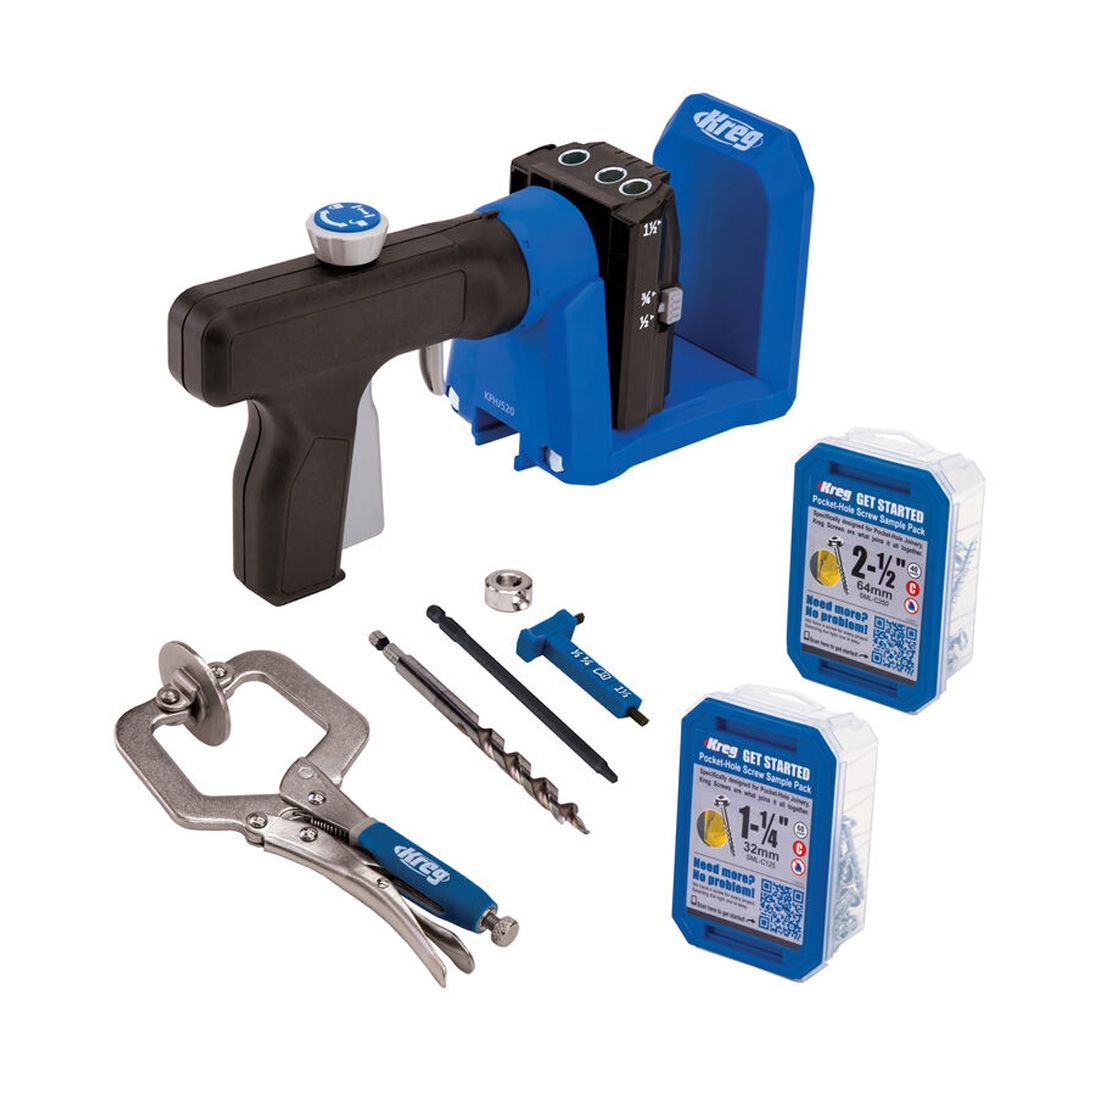 picture exhibits the 520pro jig, with 2 inch clamp, stepped drill bit with depth collar and hex key, long driver bit and two boxes of screws size of 2.1/2inch 50pk and 1.1/4inch 100pk